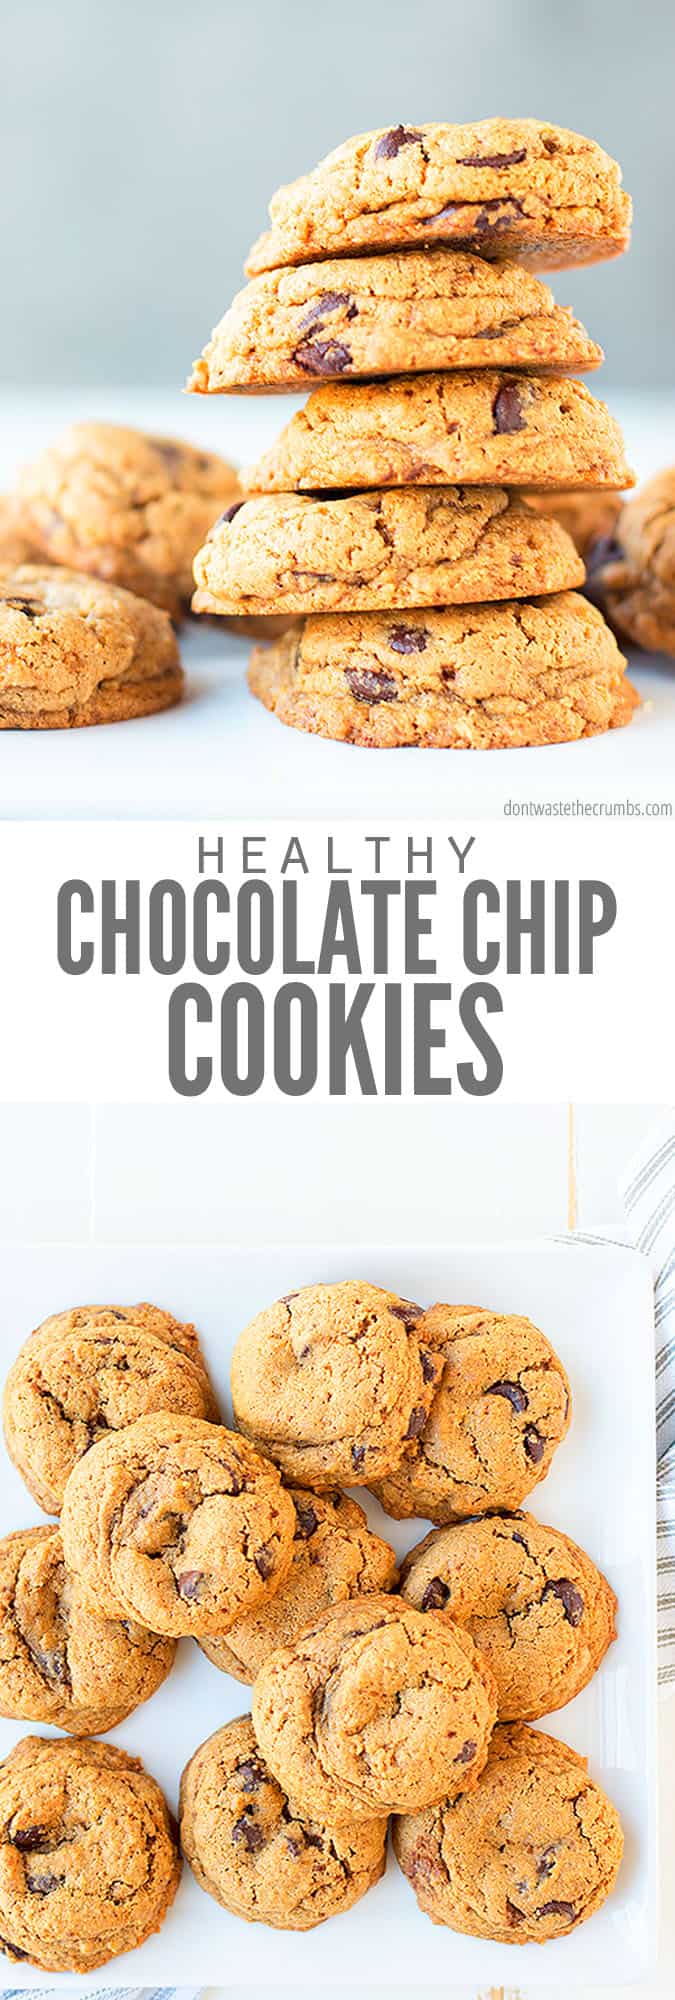 Healthy Chocolate Chip Cookies (+ Video) - Don't Waste the Crumbs